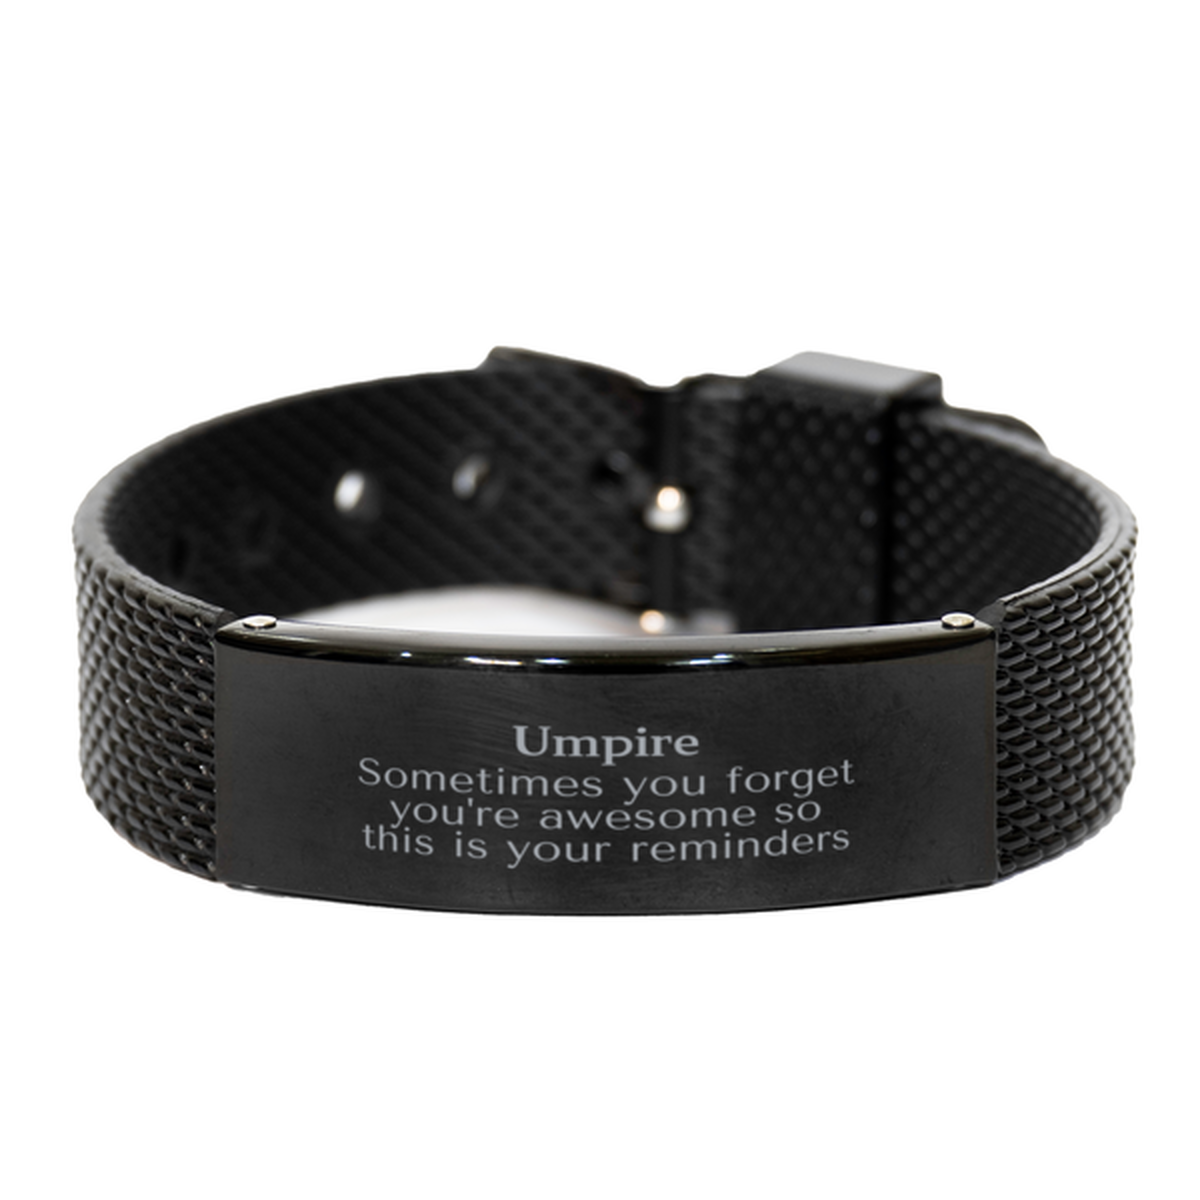 Sentimental Umpire Black Shark Mesh Bracelet, Umpire Sometimes you forget you're awesome so this is your reminders, Graduation Christmas Birthday Gifts for Umpire, Men, Women, Coworkers